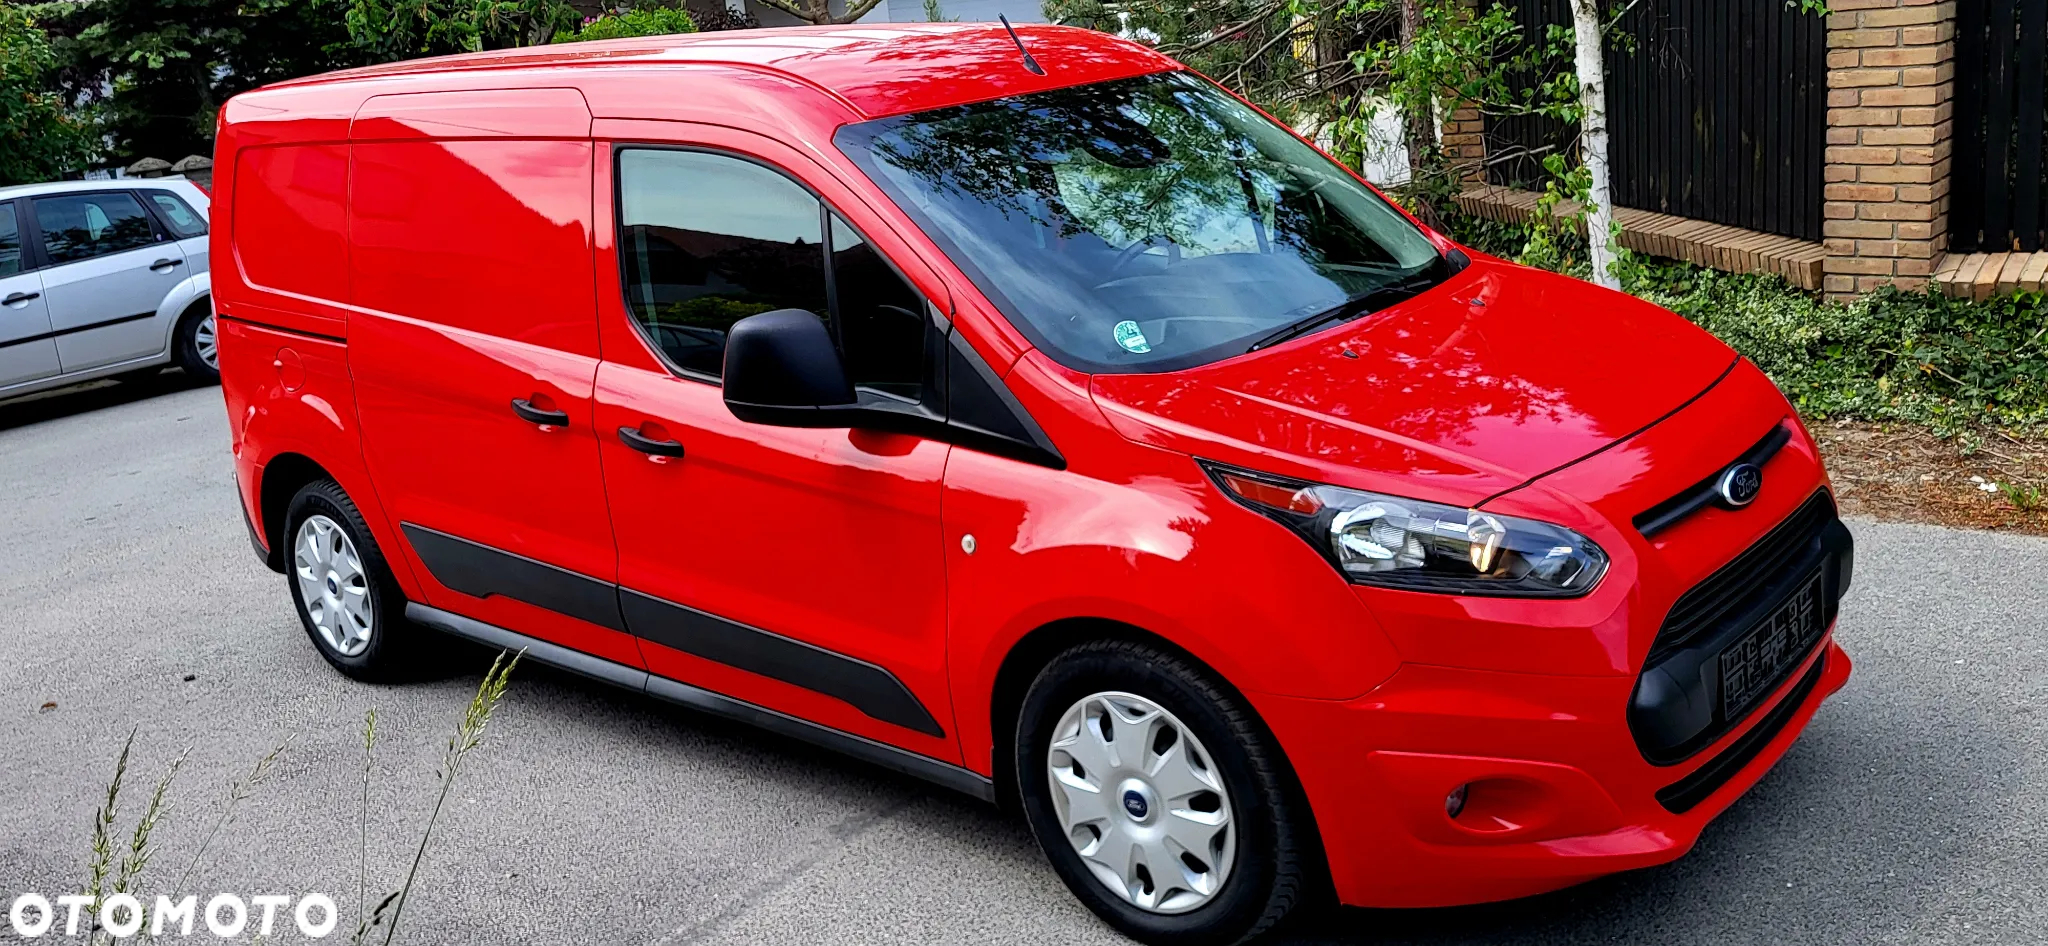 Ford TRANSIT CONNECT - 5